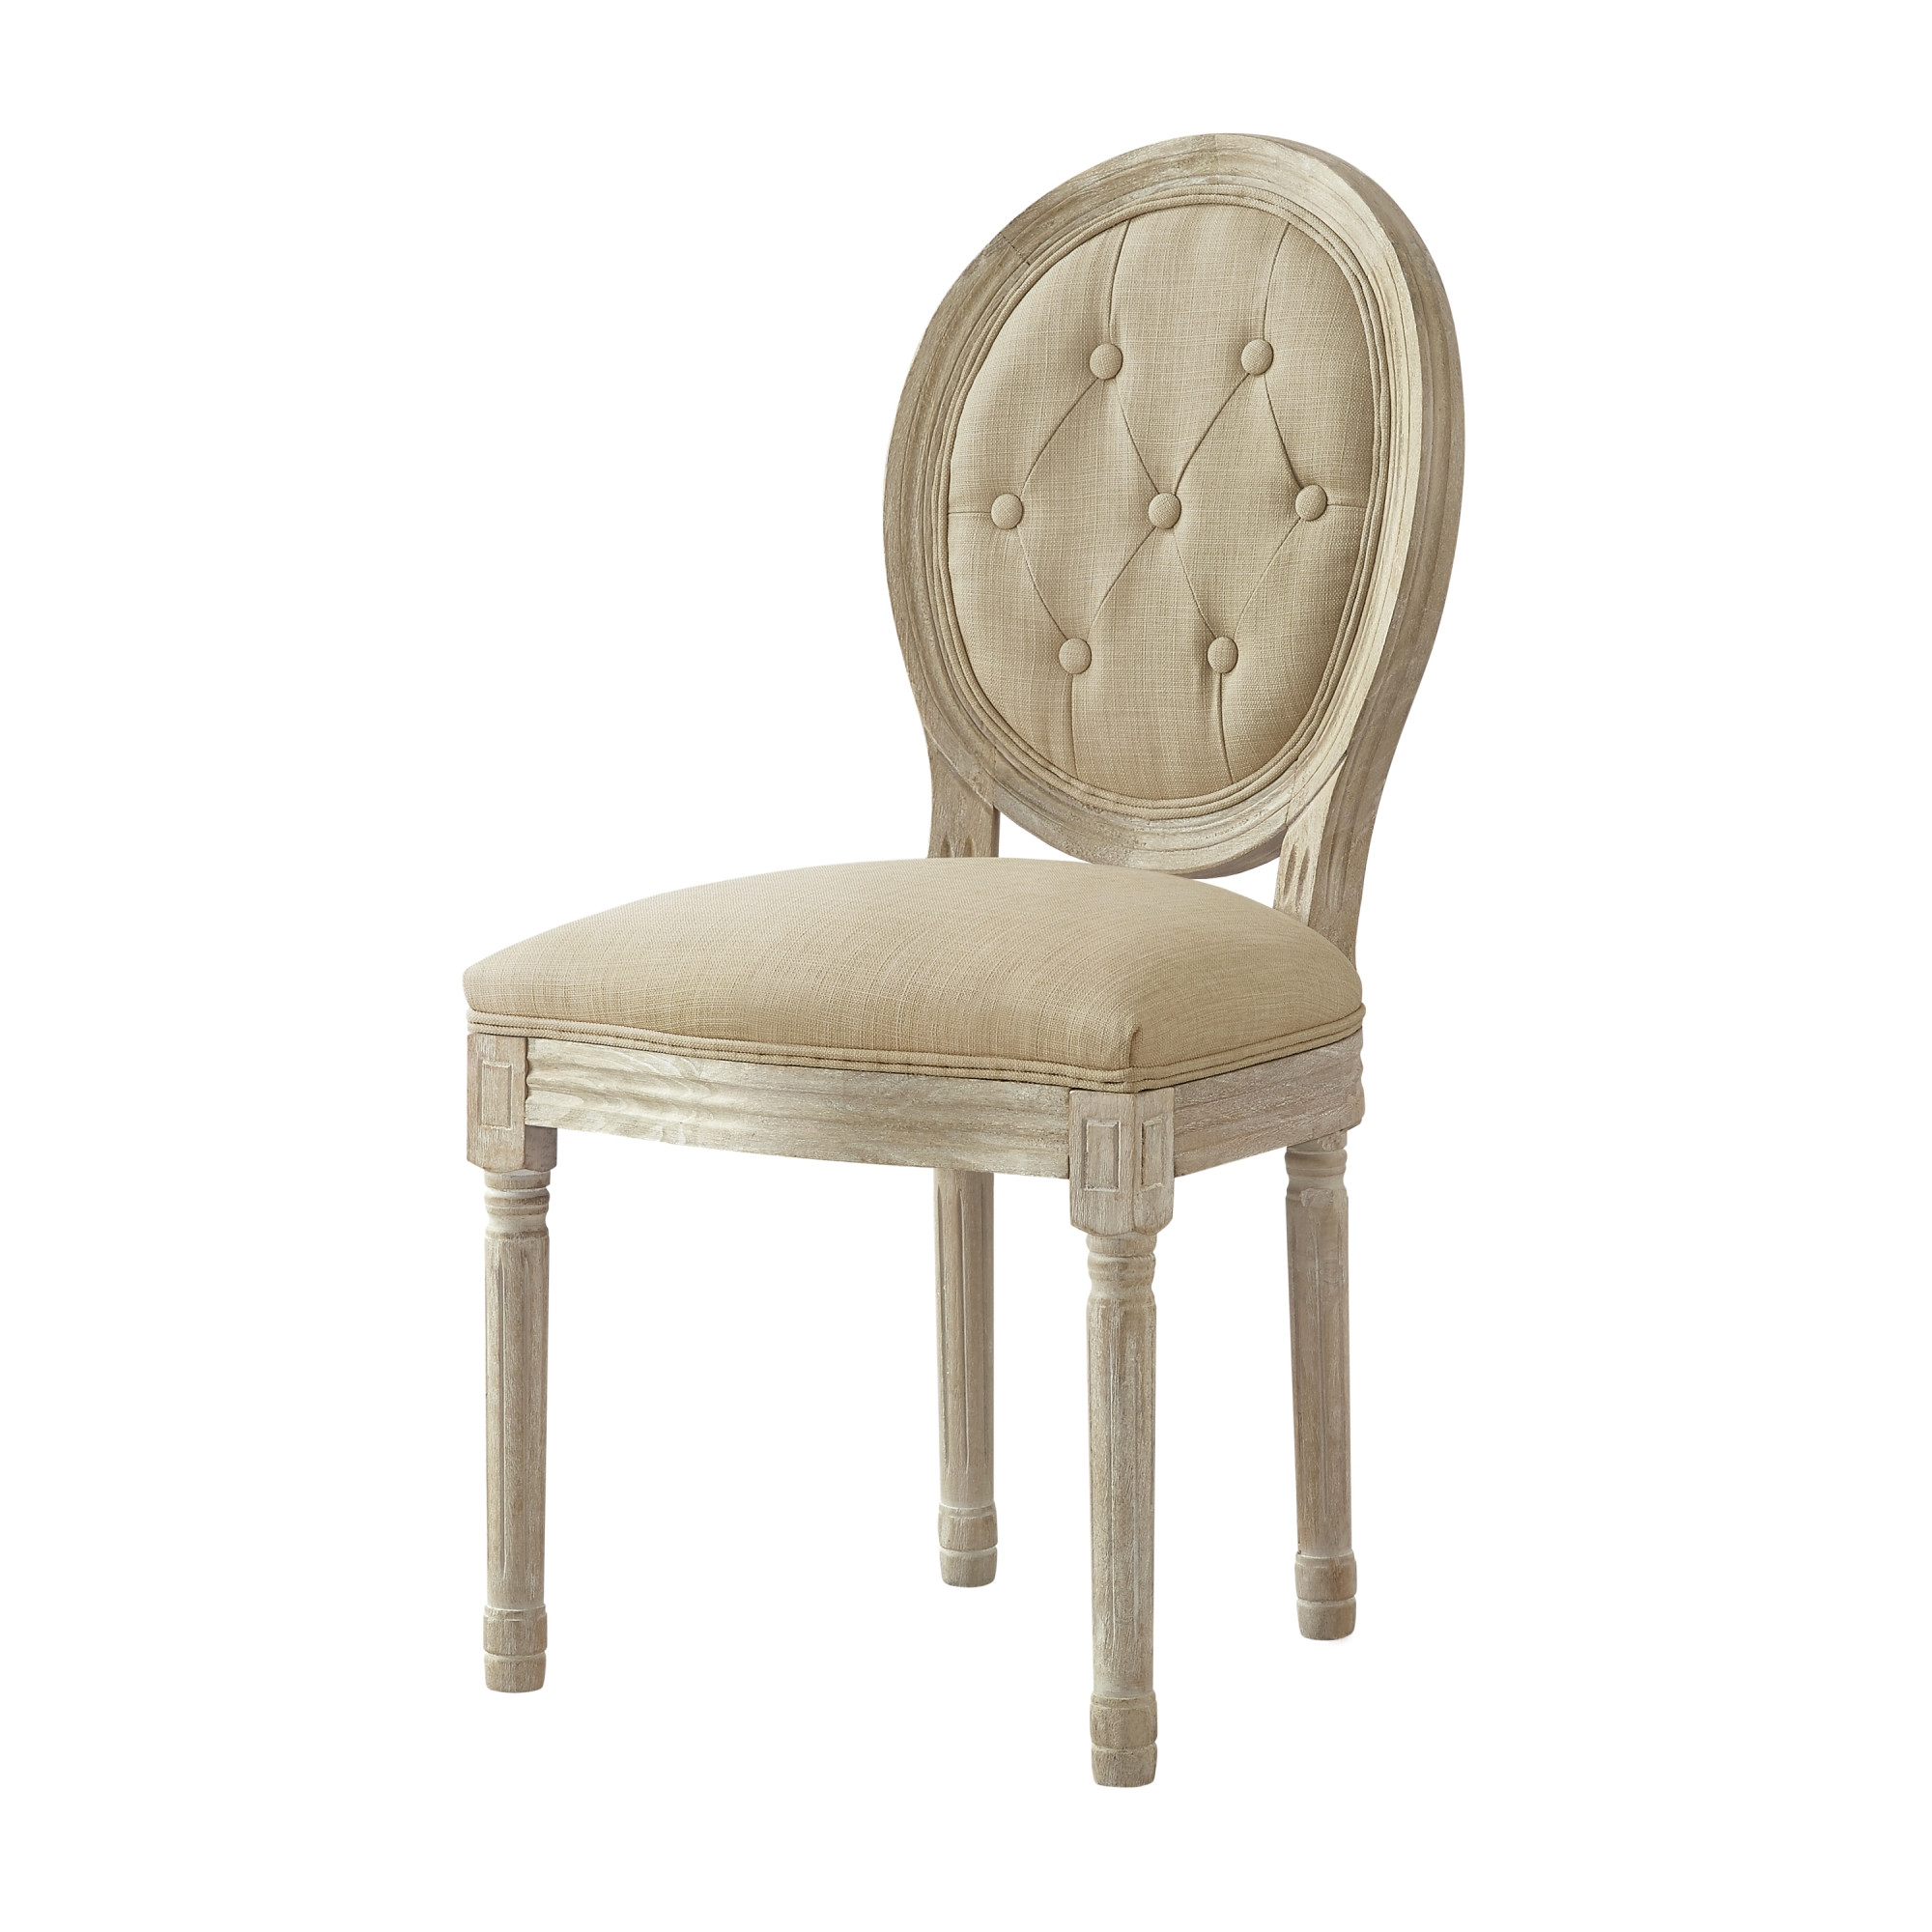 Tufted Beige and Brown Upholstered Linen Dining Side Chair-535366-1